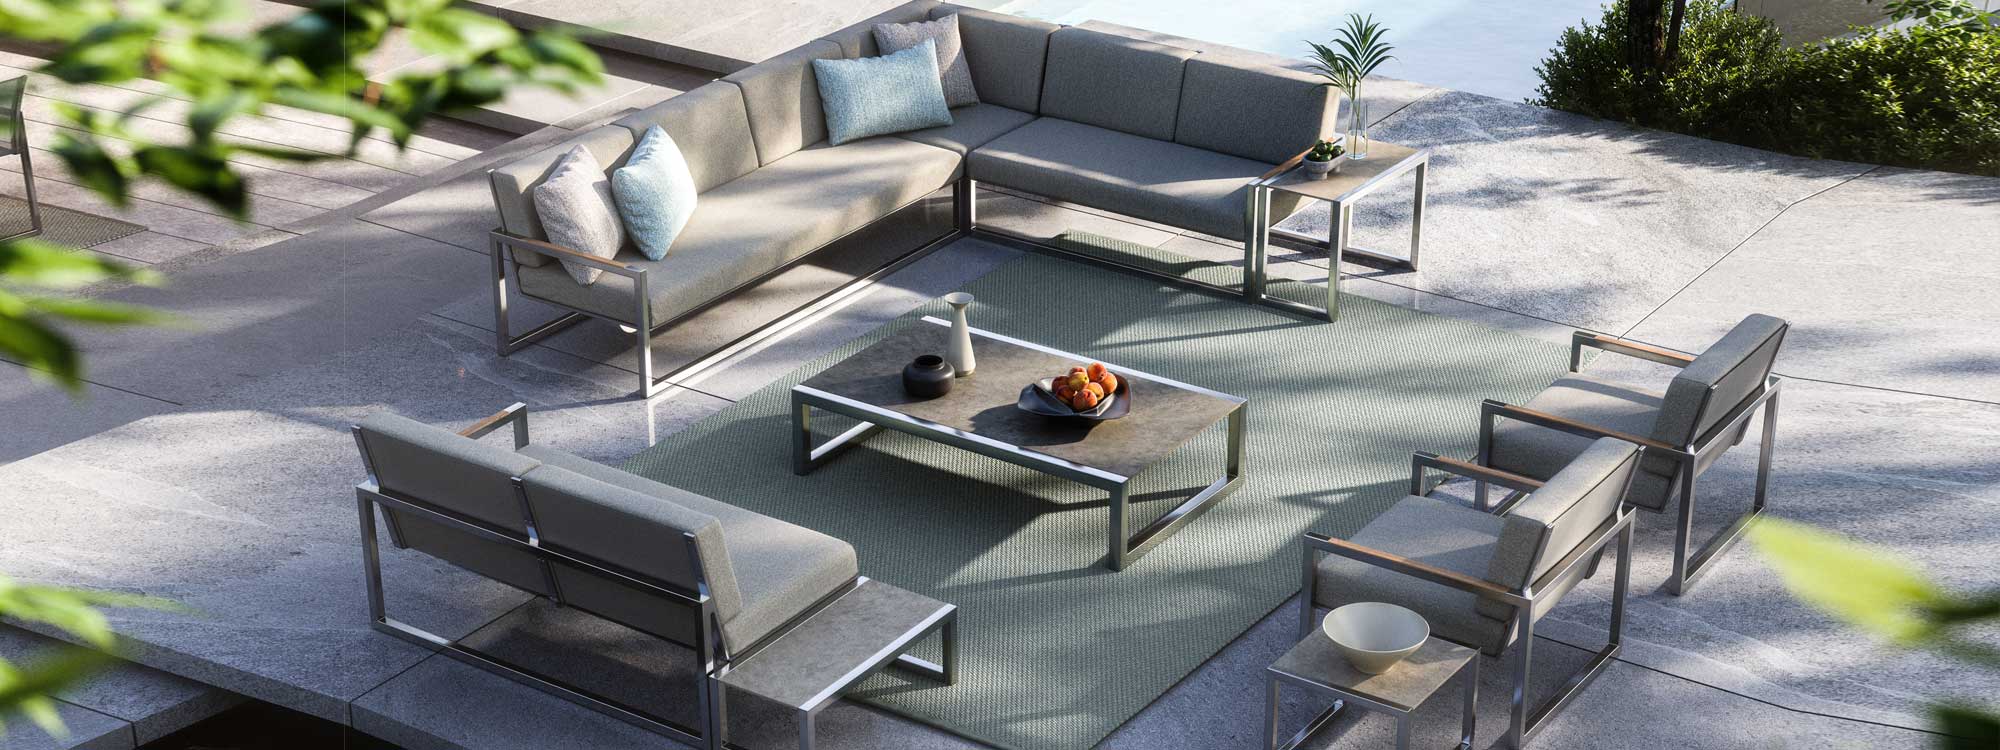 Image of aerial view of Ninix Lounge modern garden corner sofa, stainless steel lounge chairs and ceramic low tables by Royal Botania